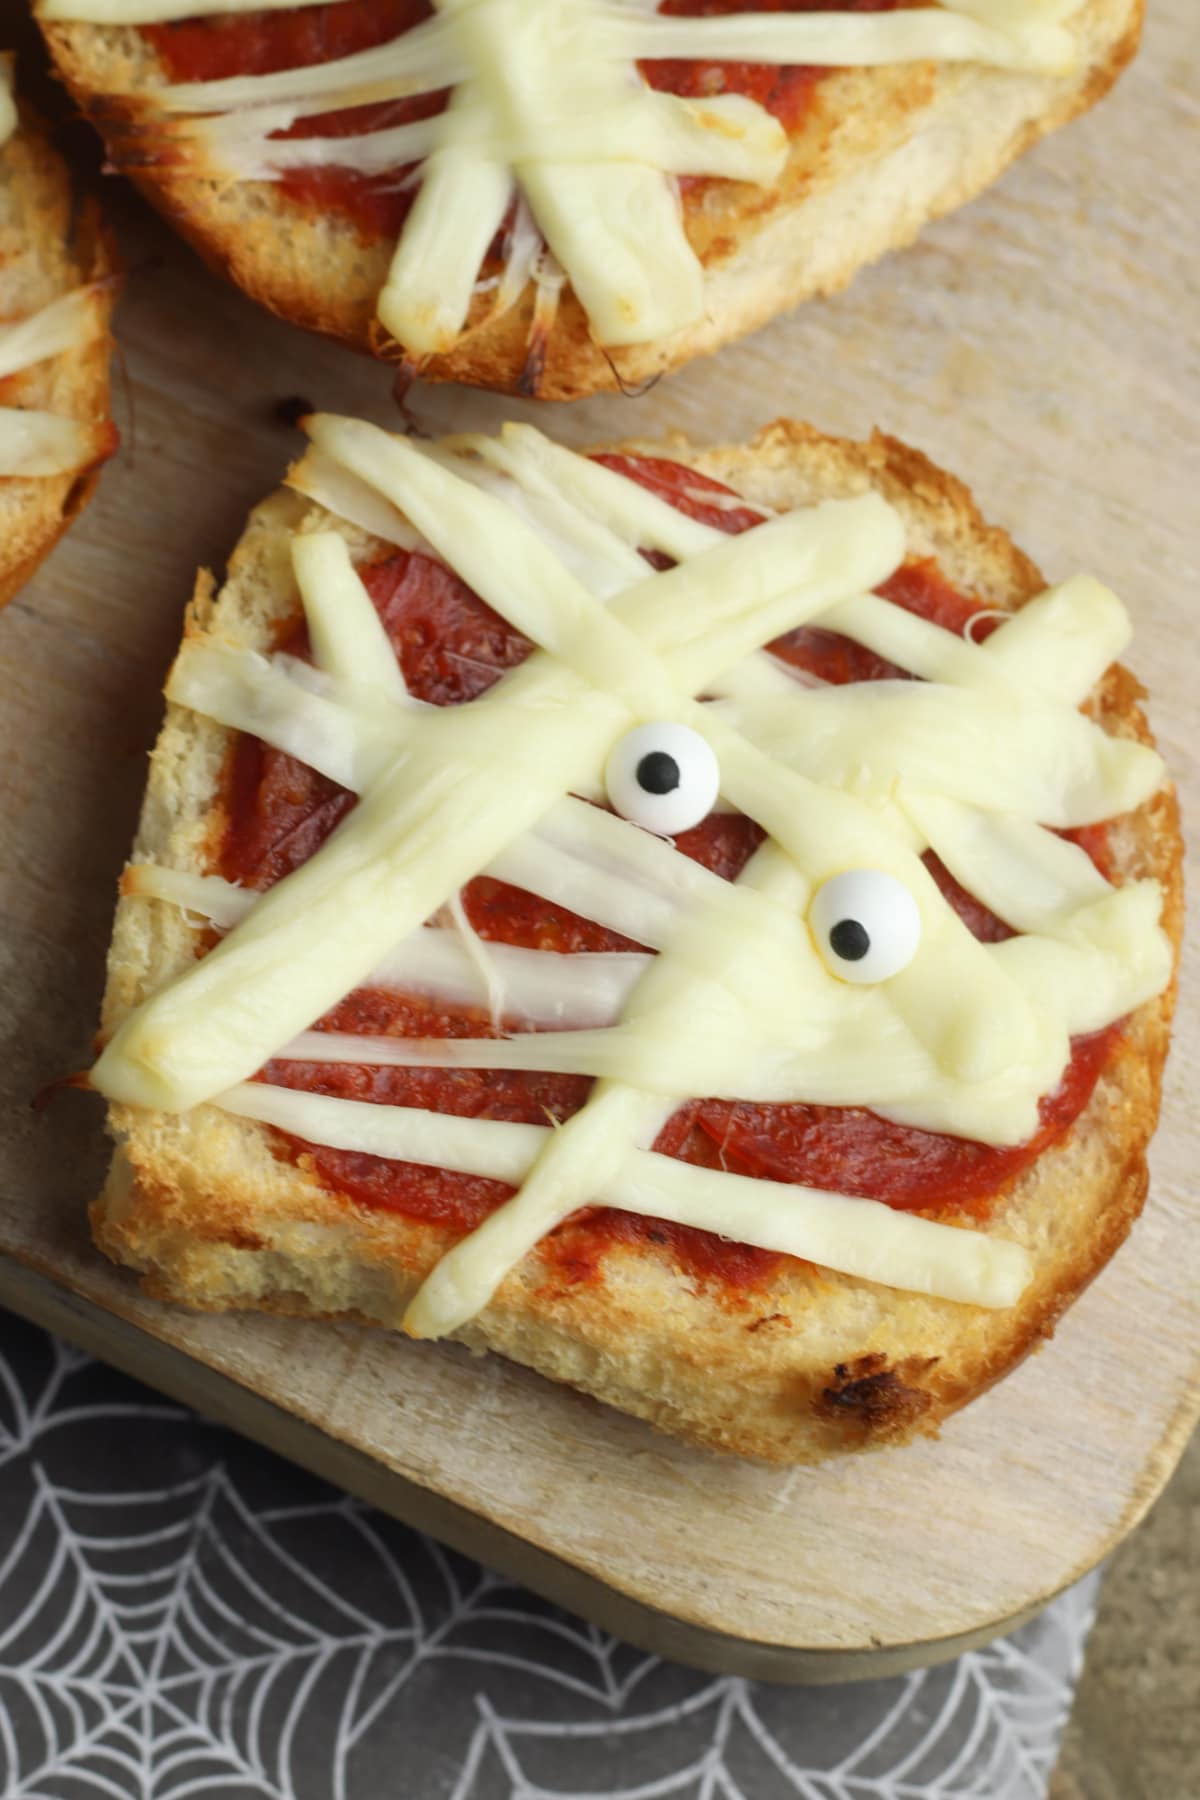 Mummy Pizza with candy eyes